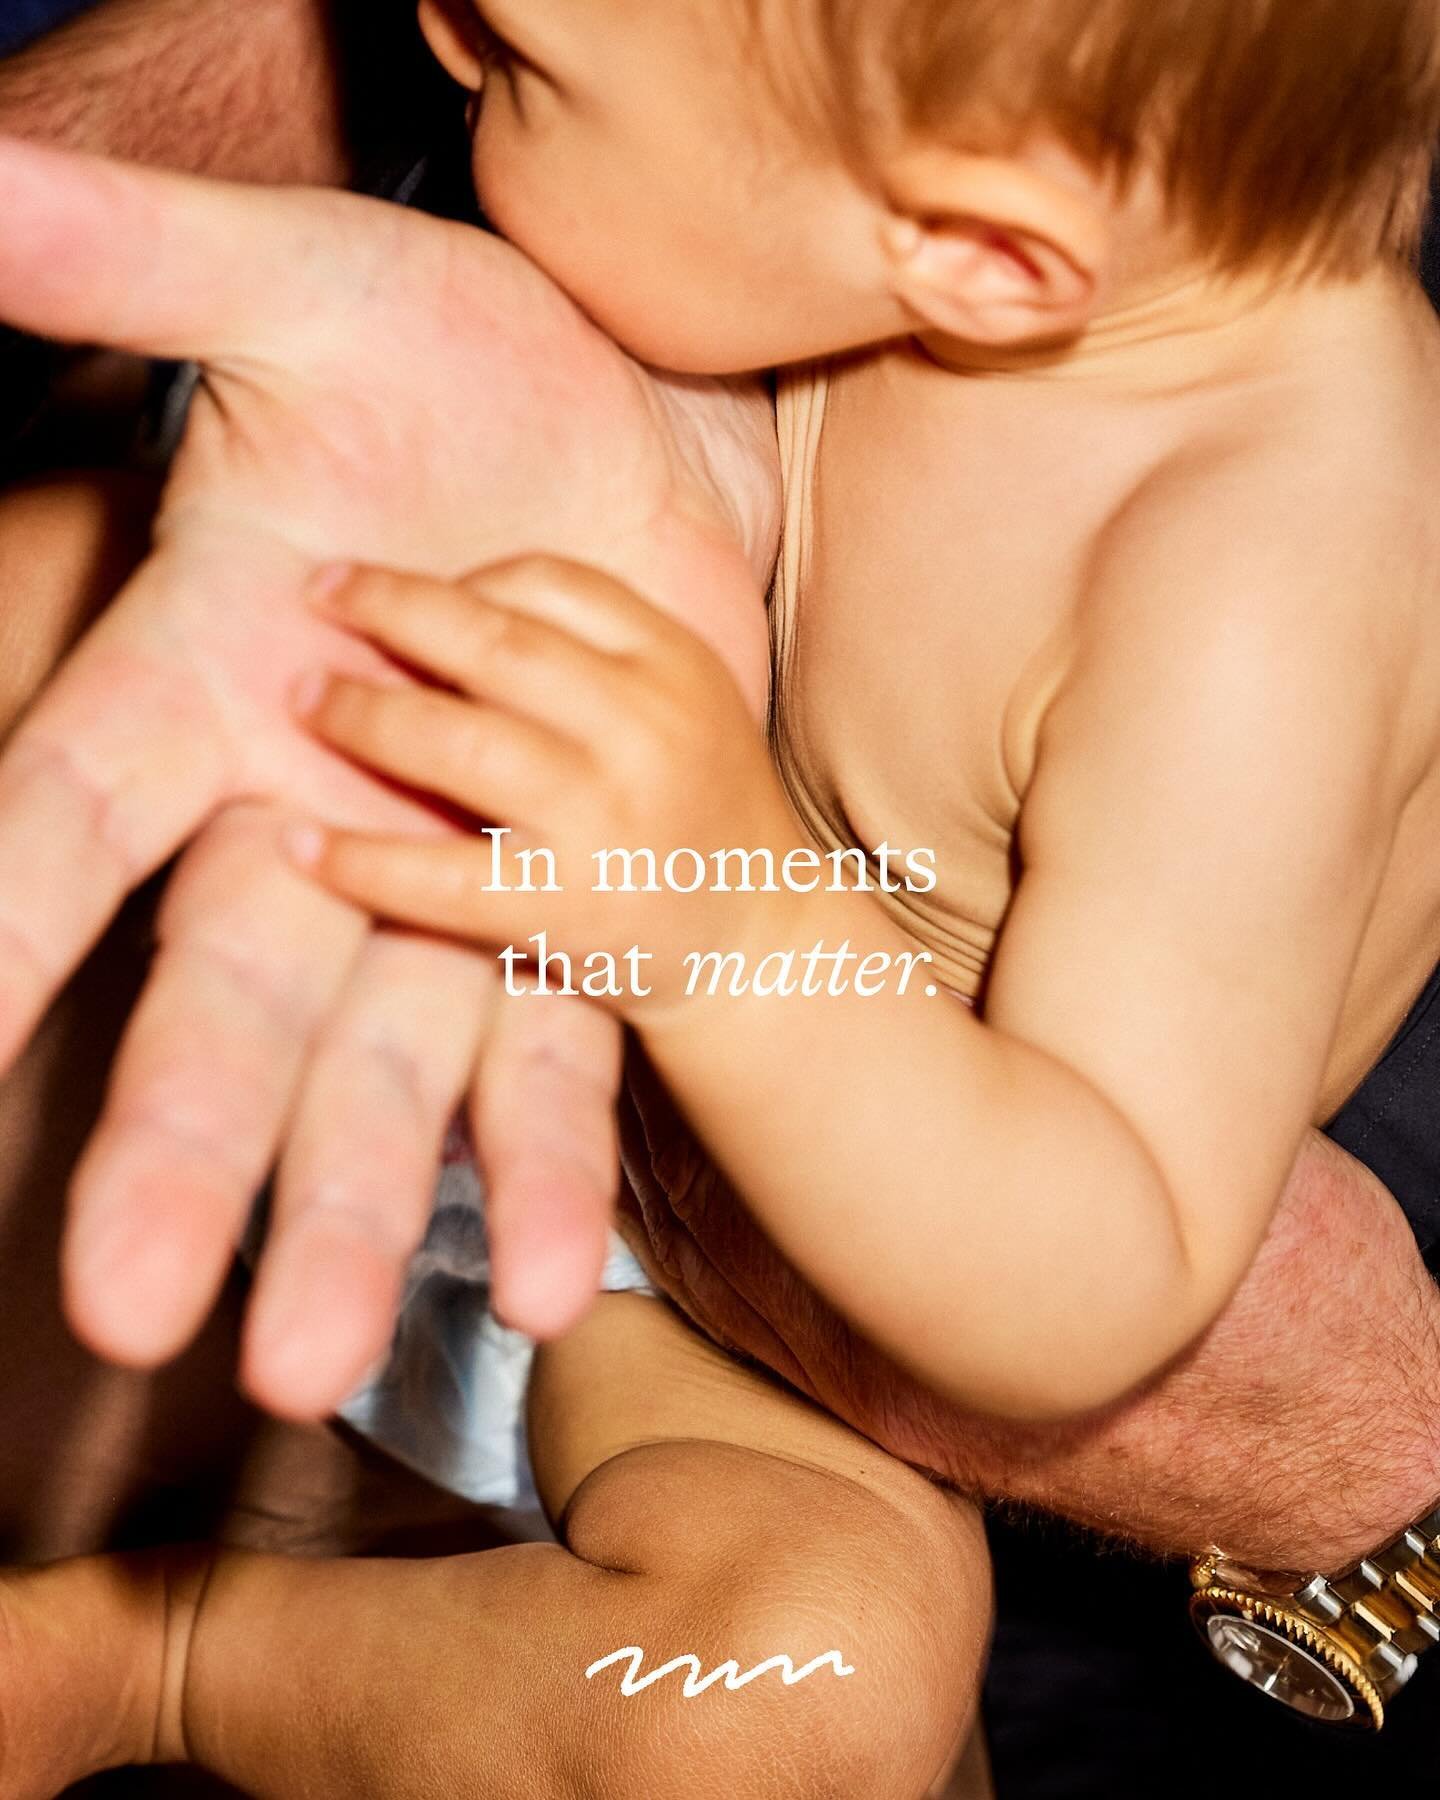 Slides from @shorttalk.co &lsquo;MOMENTS&rsquo; campaign

Shot by Shelley Horan, the concept for the Short Talk brand shoot shot was an archive of life moments, gritty chaos, familial charm and celebration of love in all forms, captured in the span o